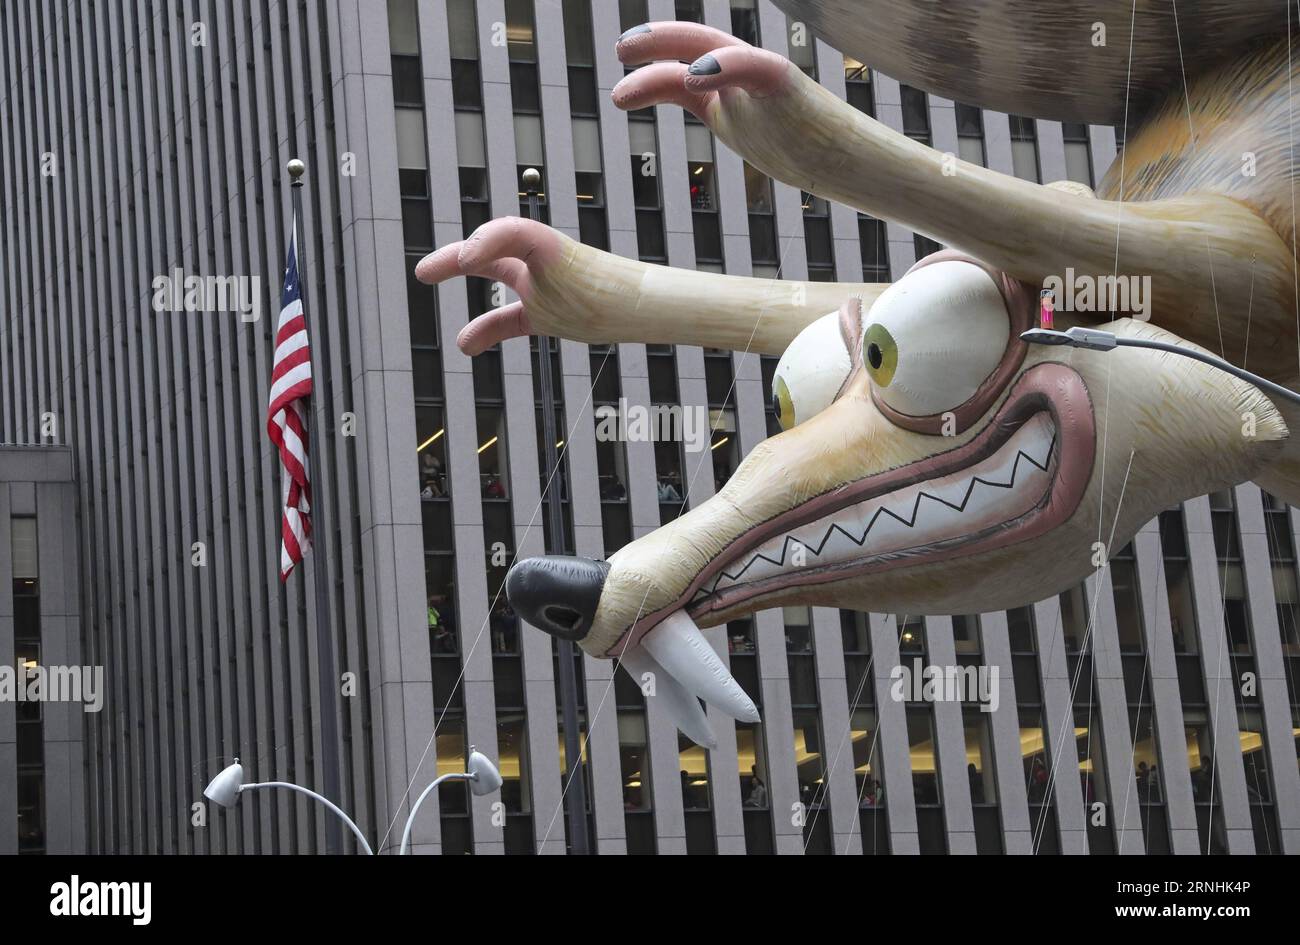 (161124) -- NEW YORK, Nov. 24, 2016 -- Photo taken on Nov. 24, 2016 shows the balloon of Ice Age s Scrat & His Acorn during the 90th Macy s Thanksgiving Day Parade in Manhattan, New York, the United States. ) U.S.-NEW YORK-THANKSGIVING DAY PARADE WangxYing PUBLICATIONxNOTxINxCHN   New York Nov 24 2016 Photo Taken ON Nov 24 2016 Shows The Balloon of ICE Age S Scrat & His ACORN during The 90th Macy S Thanksgiving Day Parade in Manhattan New York The United States U S New York Thanksgiving Day Parade WangxYing PUBLICATIONxNOTxINxCHN Stock Photo